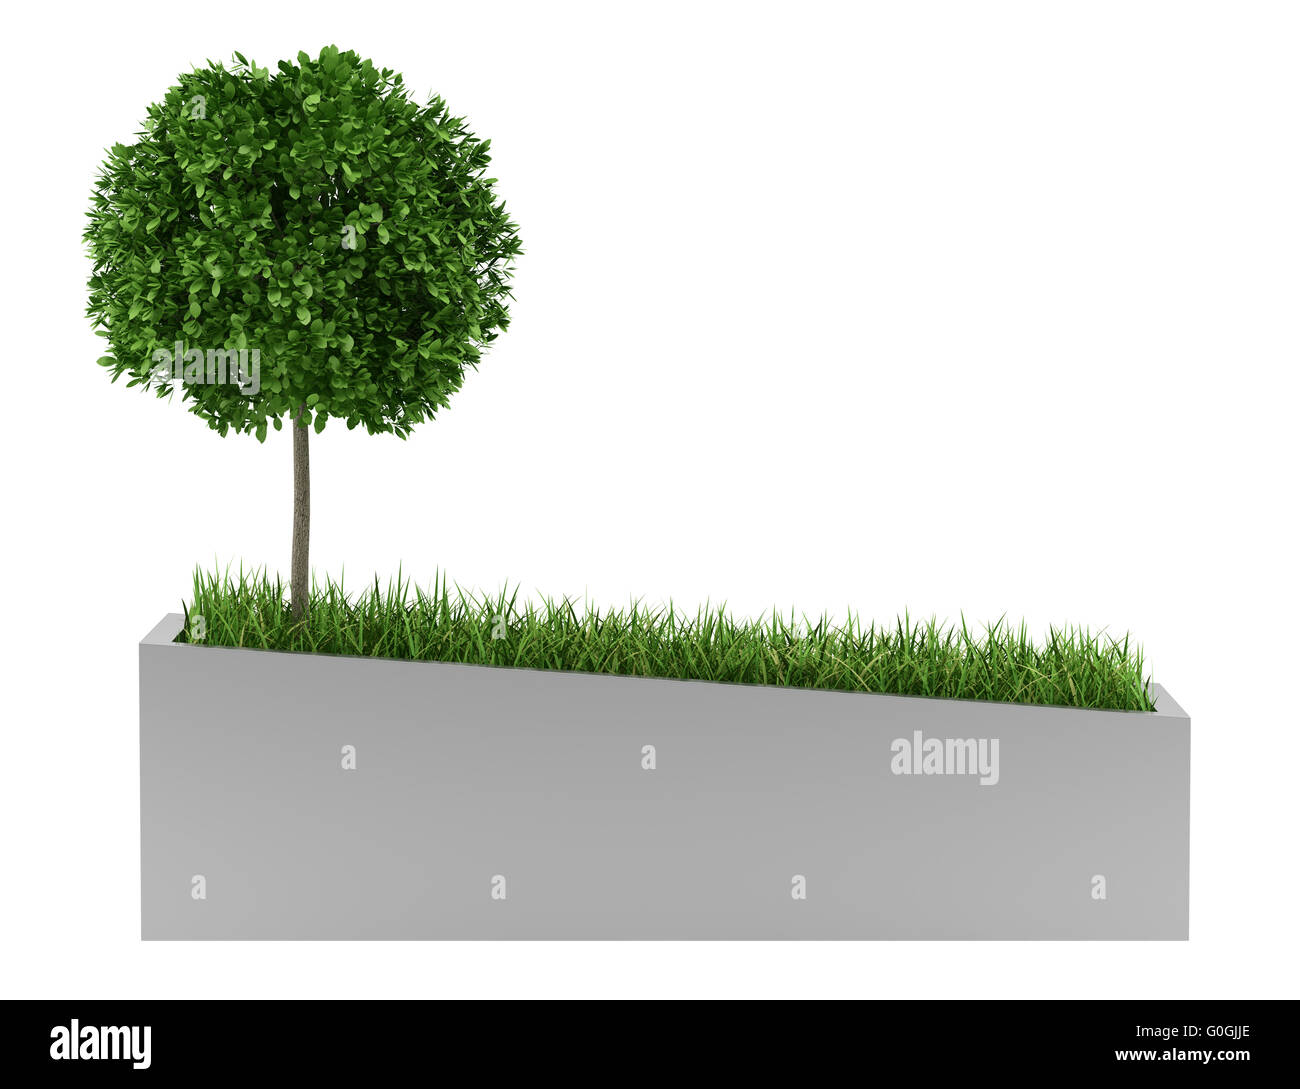 tree and grass in concrete planter isolated on white background Stock Photo